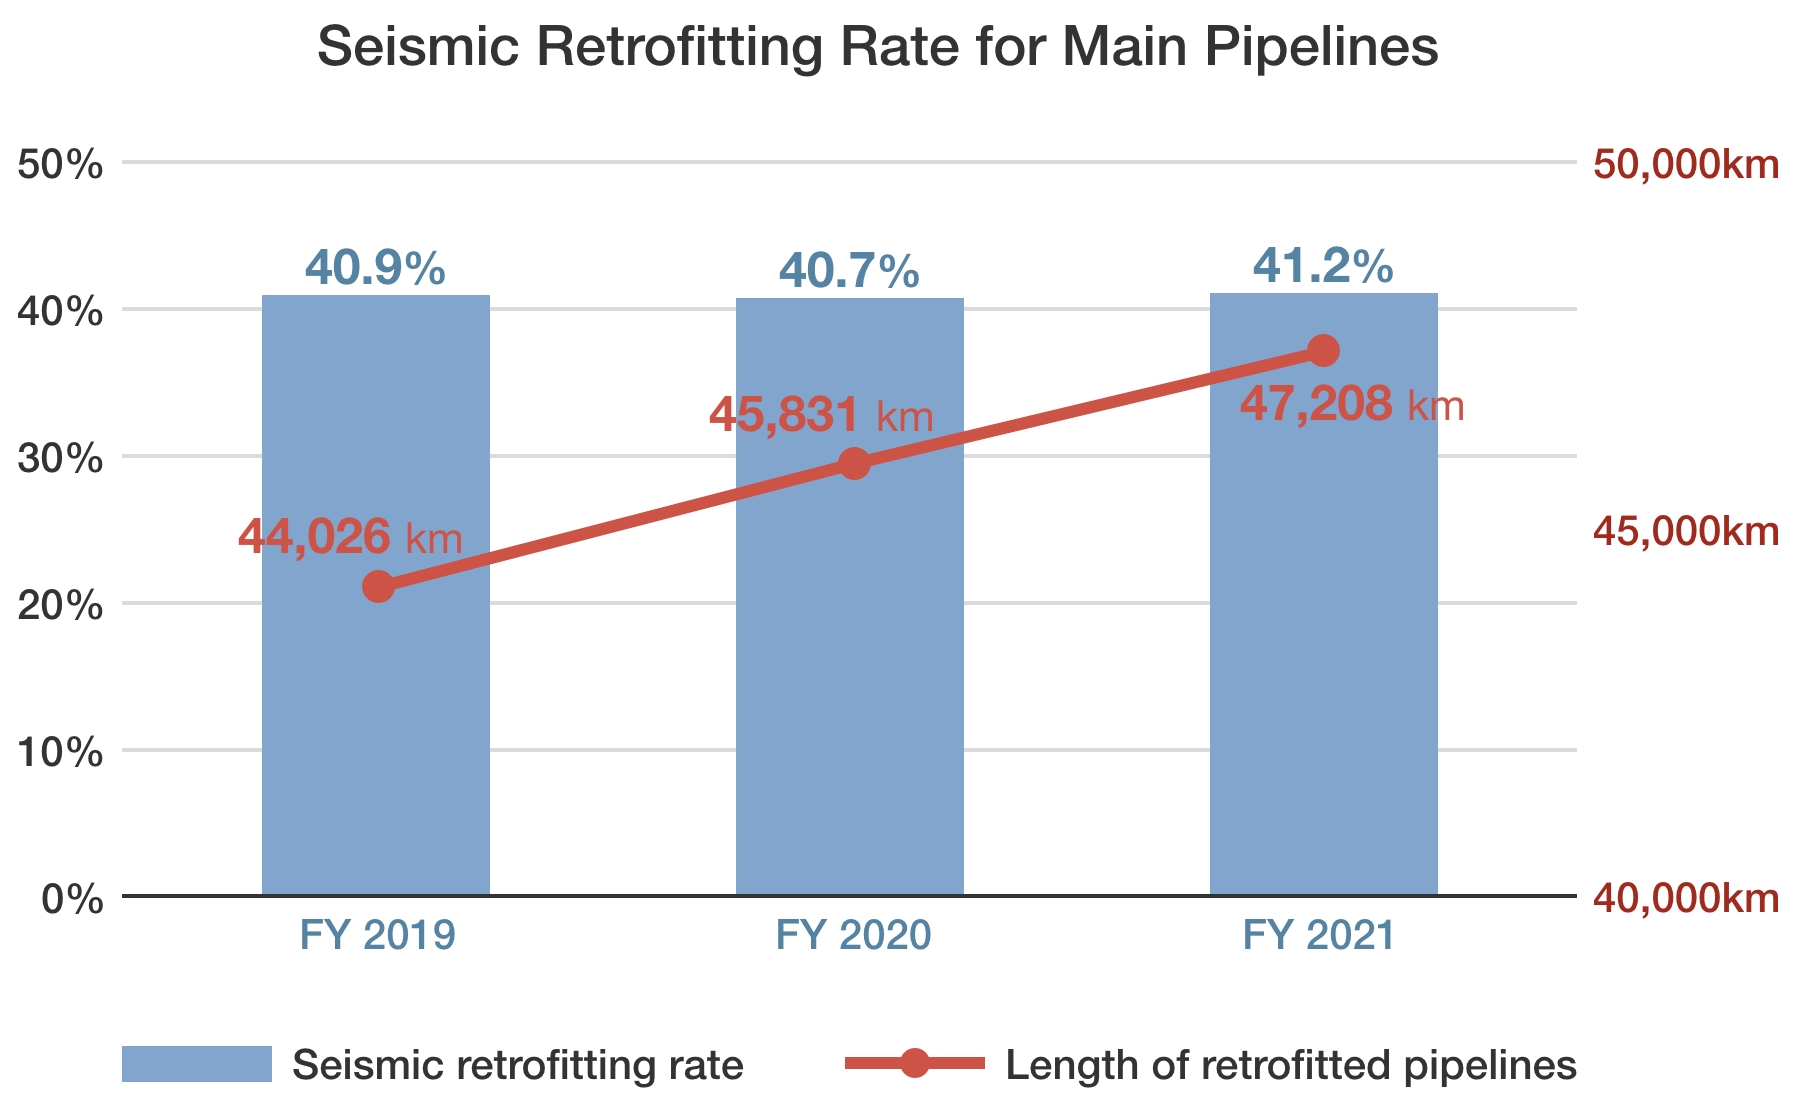 Seismic Retrofitting Rate for Main Pipelines